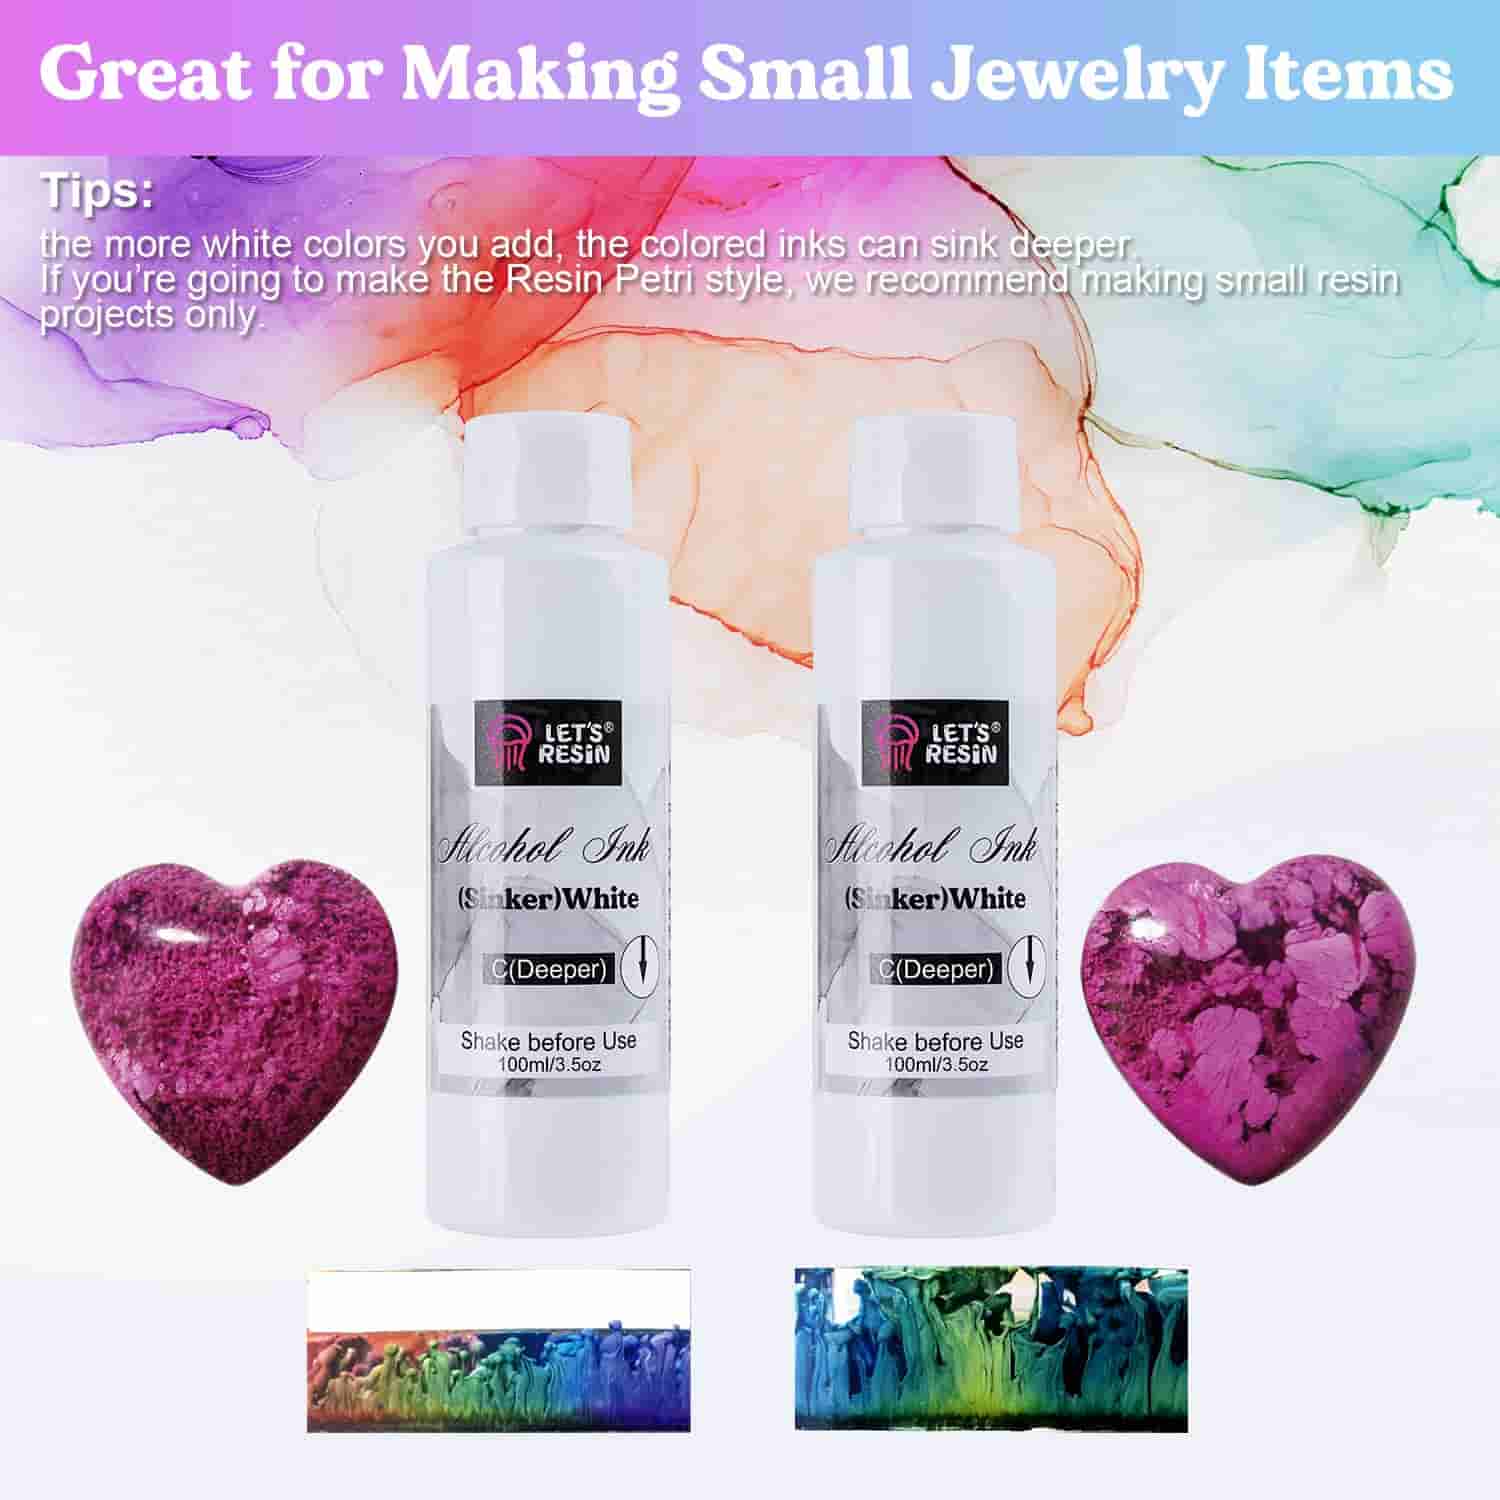 LET'S RESIN White Alcohol Ink for Resin, Alcohol Ink White Colors,2 Bottles  Each